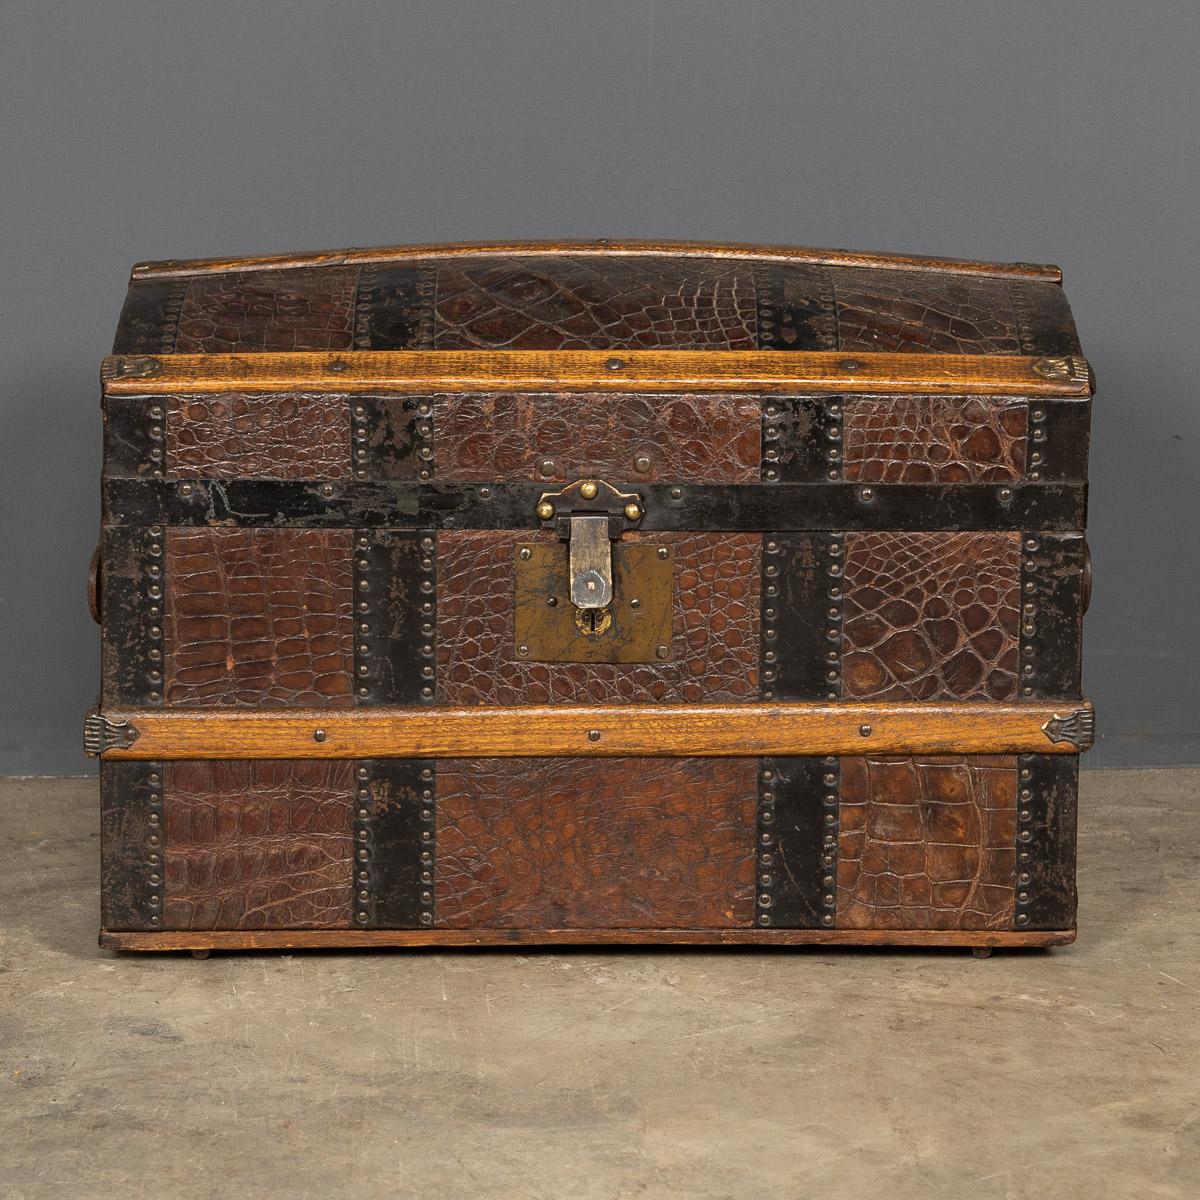 Antique early-20th century steel bound, crocodile covered travelling trunk for a child, these trunks were also used to store childrens clothes. This piece has its original wooden interior and lock with key.

Condition
In great condition - wear as